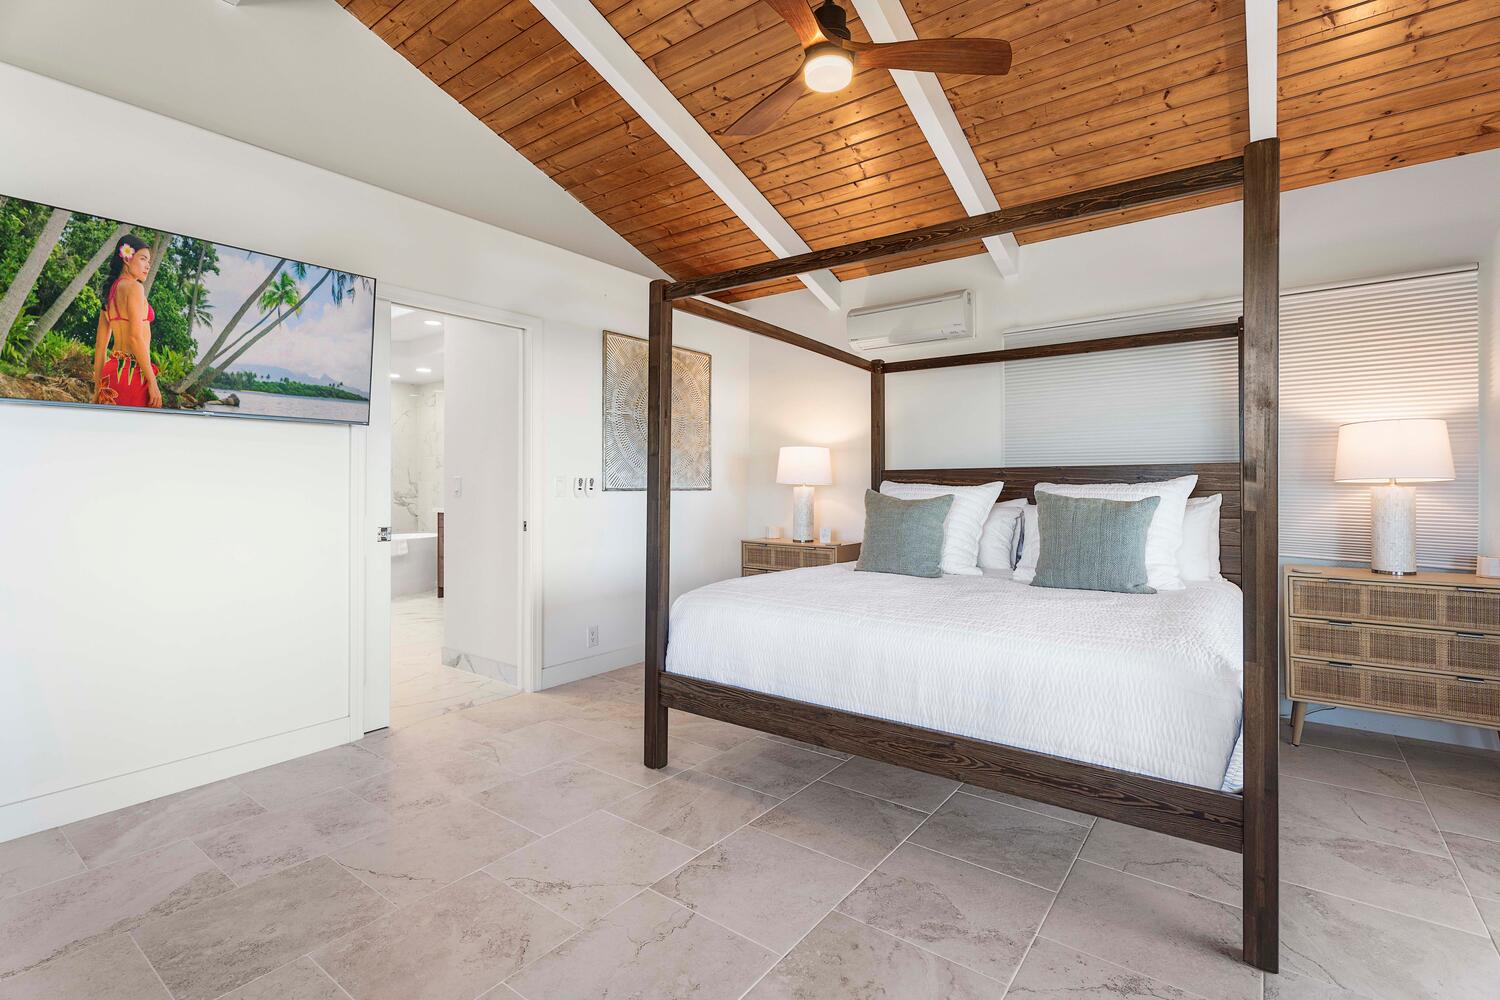 Kailua Kona Vacation Rentals, Ho'okipa Hale - Primary suite with a plush king bed clothed in fine linens and an ensuite bathroom